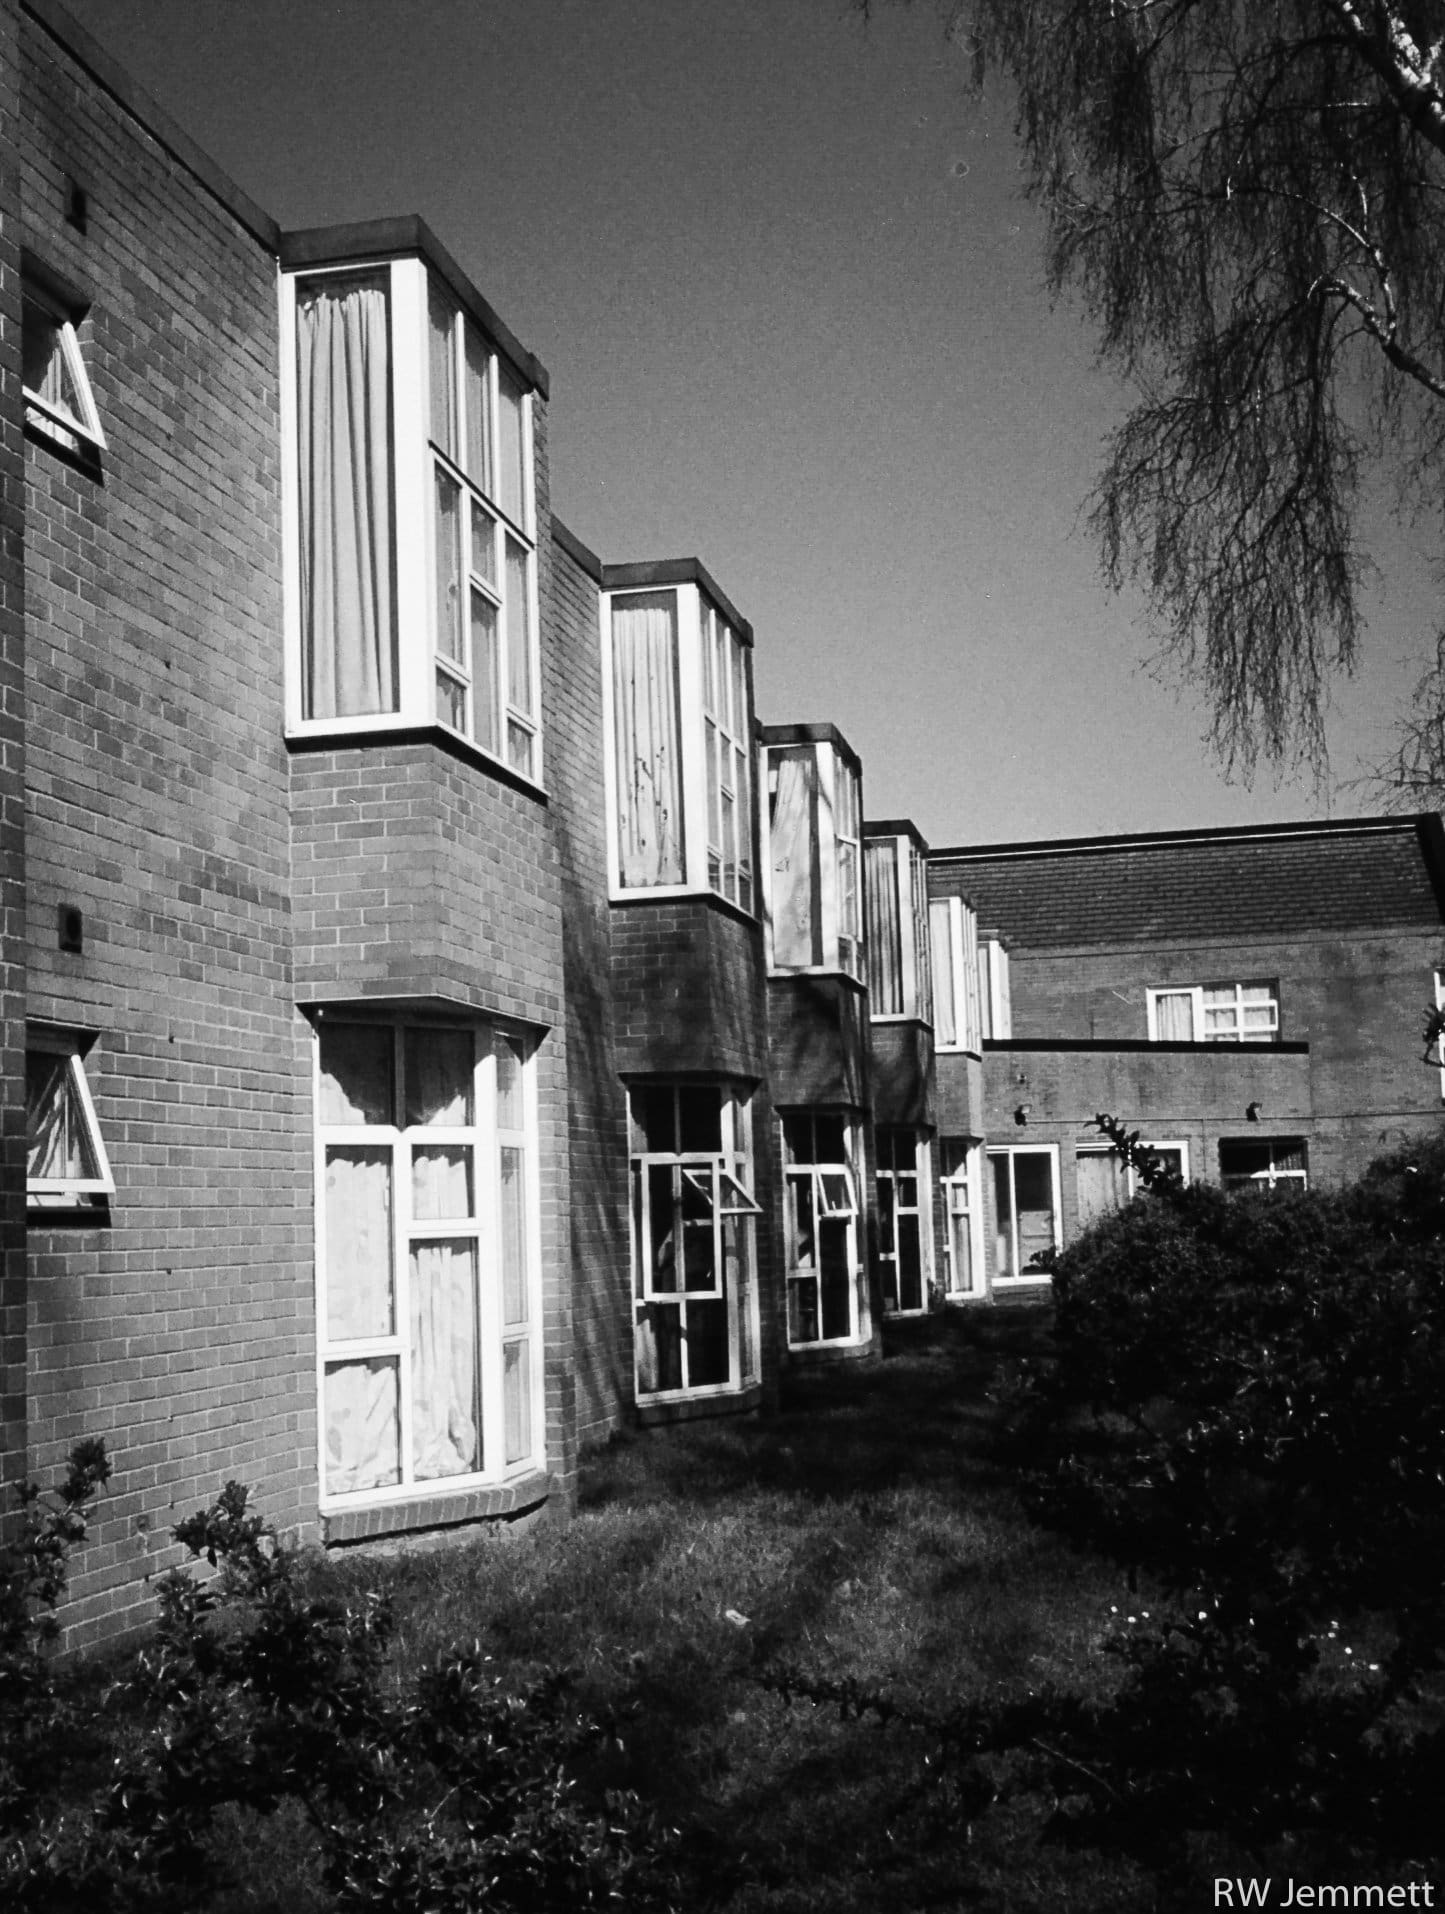 Row of homes in Great Hollands, Bracknell